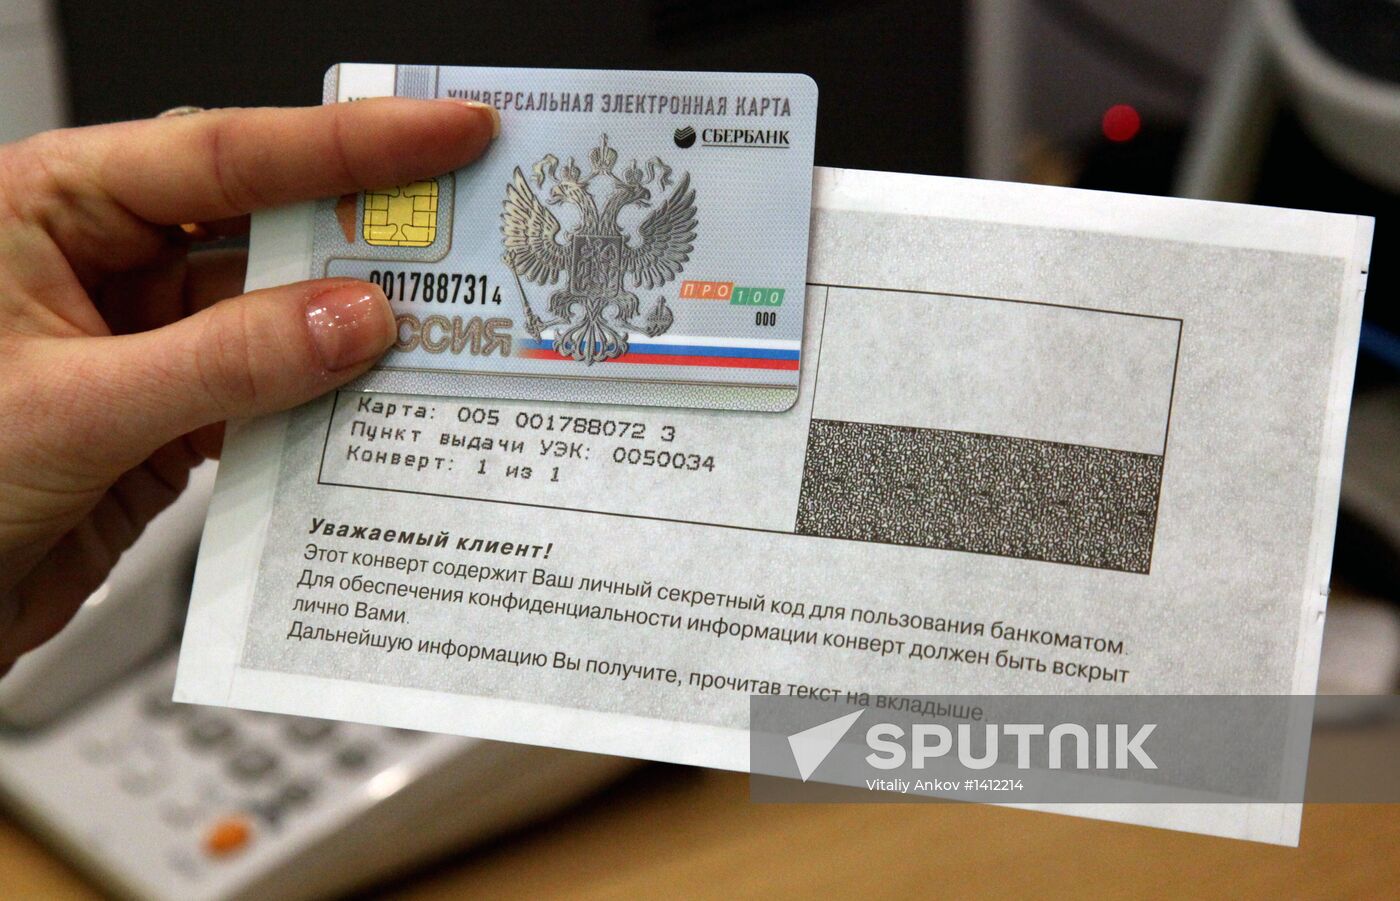 Universal electronic cards introduced in Primorye Territory